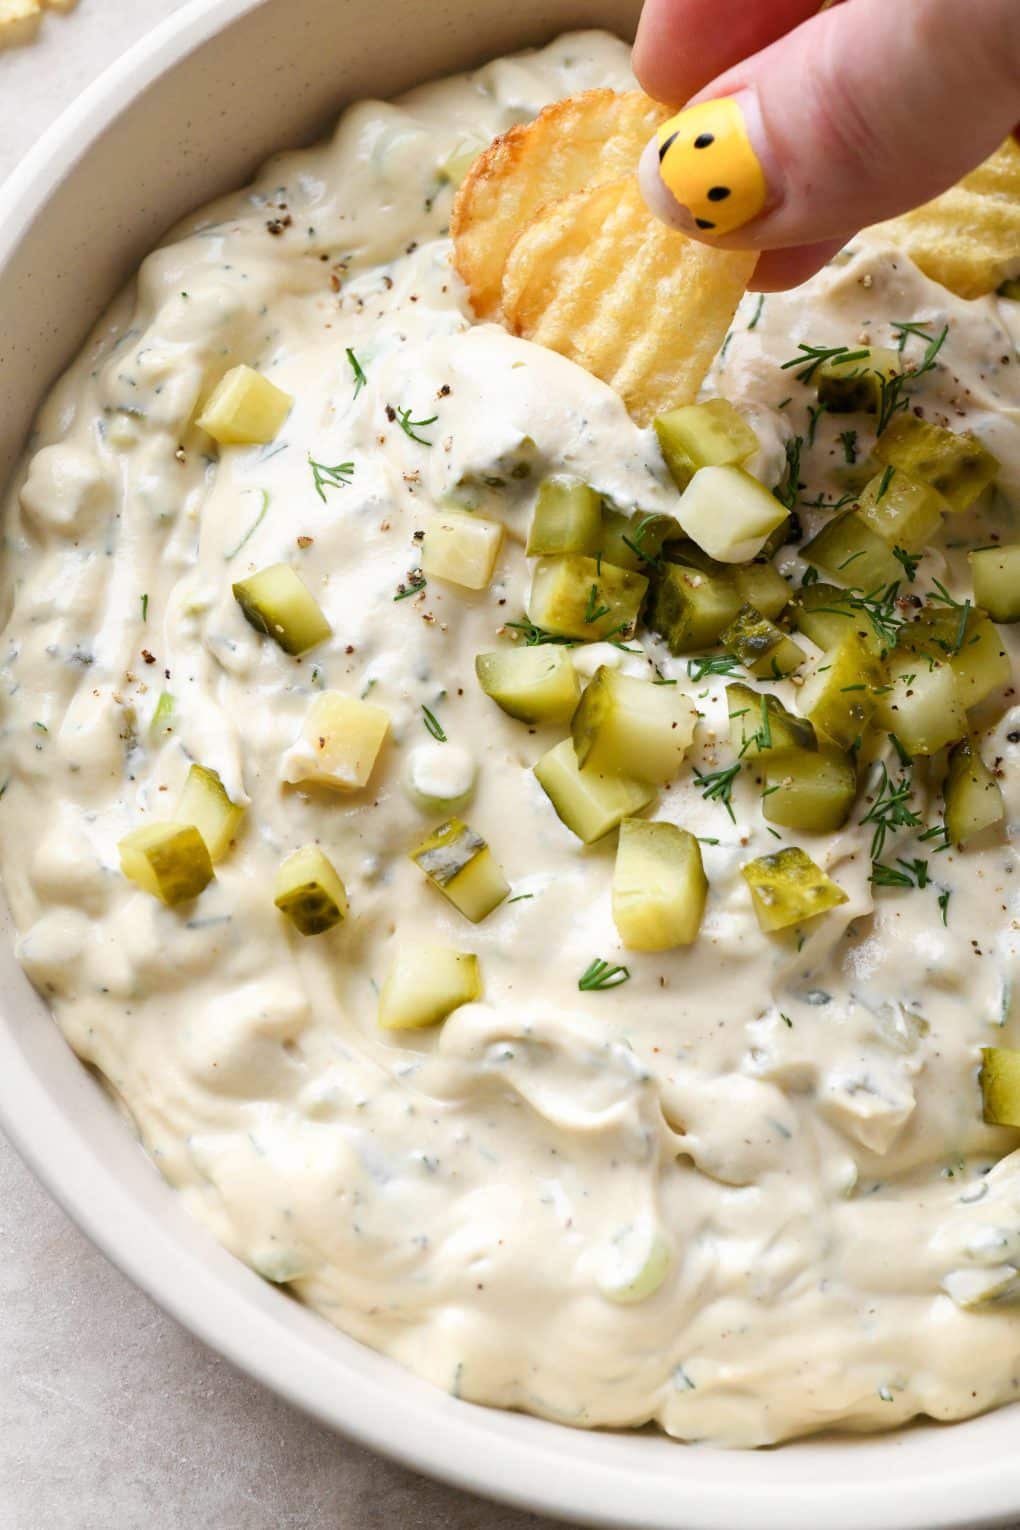 A hand dipping a ruffled potato chip into dairy free dill pickle dip.